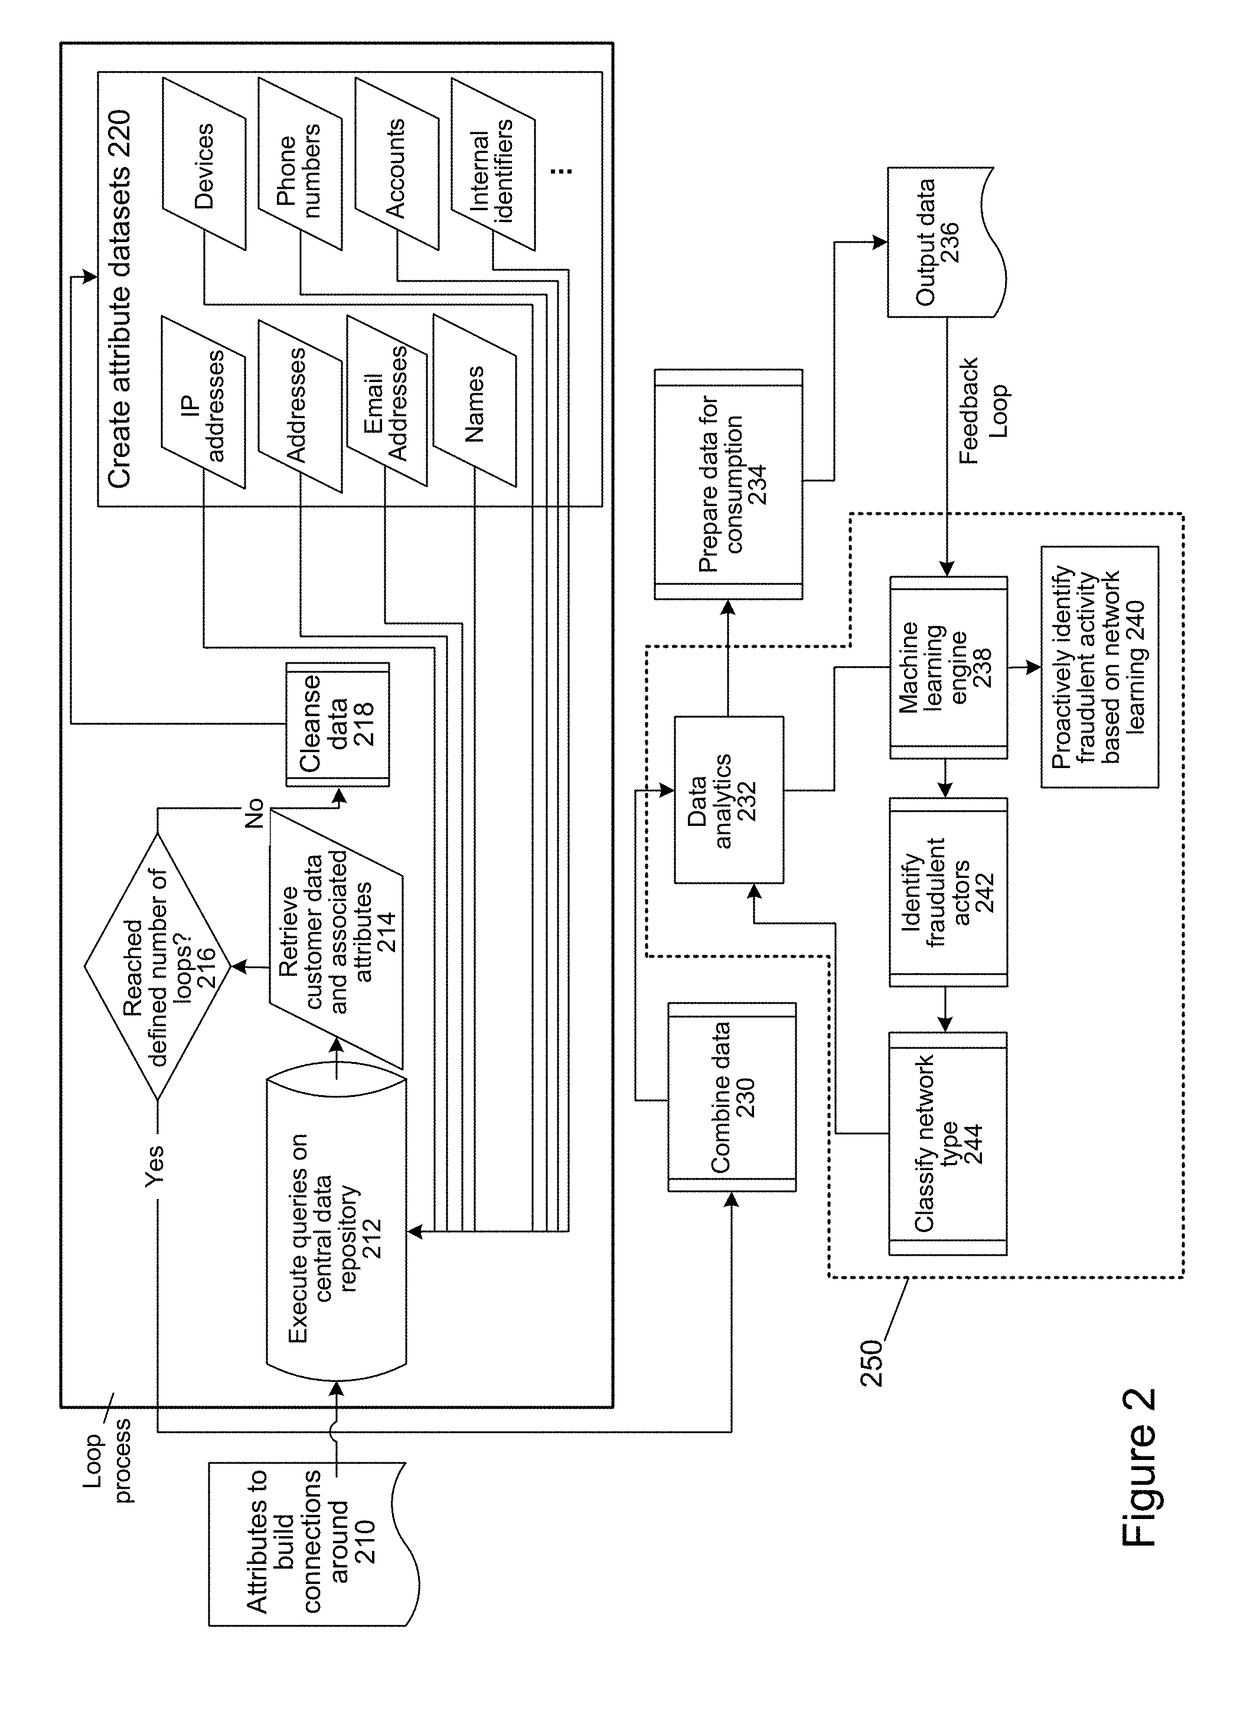 System and method for providing database abstraction and data linkage